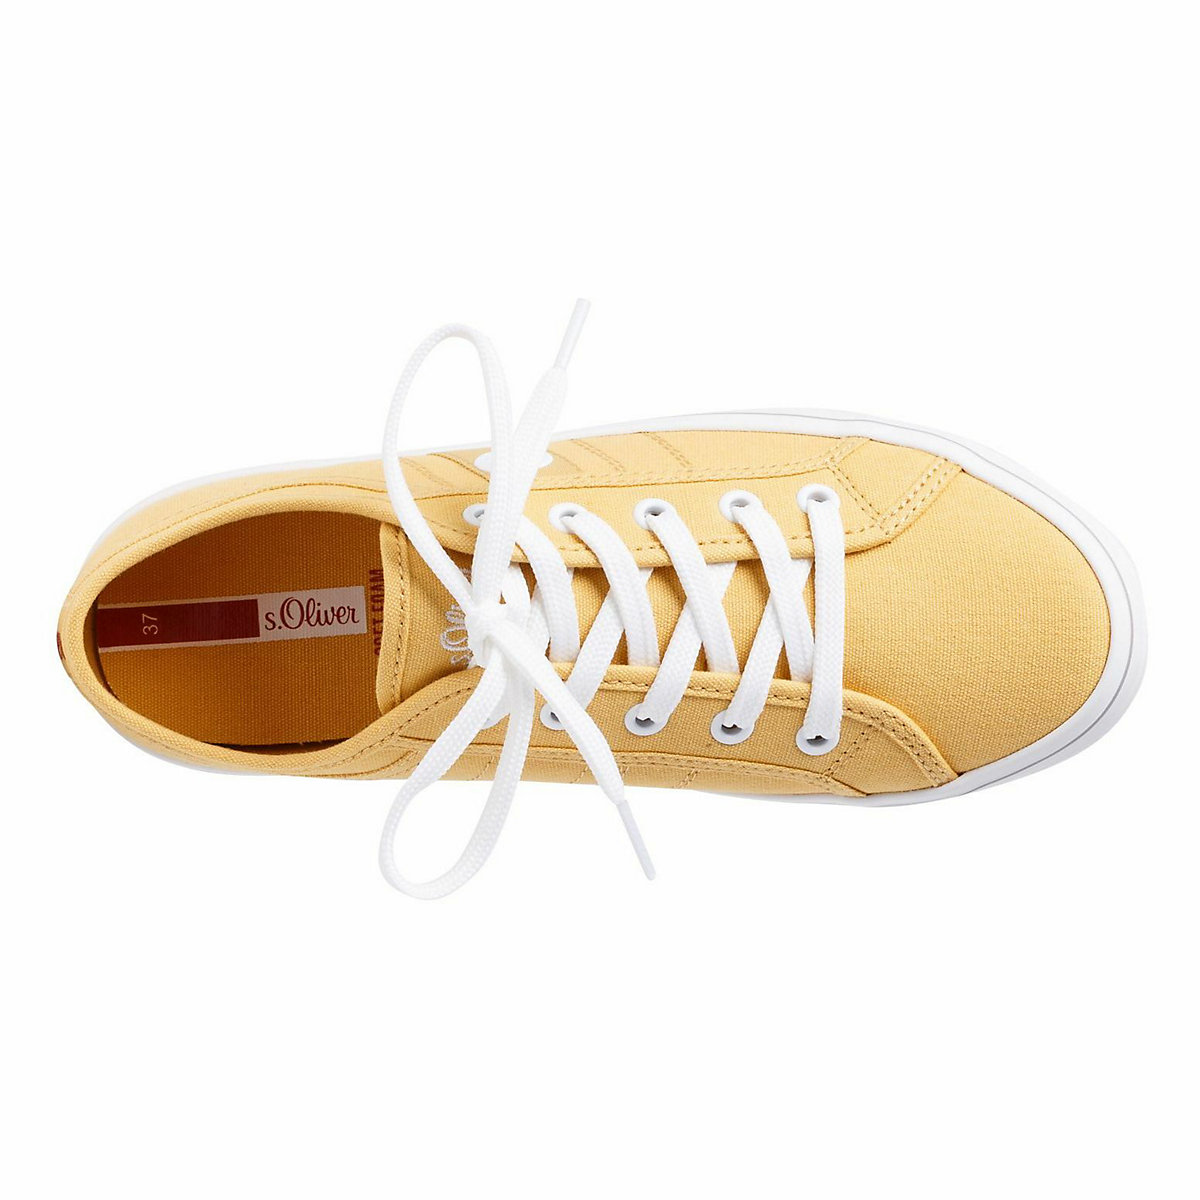 s.Oliver s.Oliver Sneaker Sneakers Low gelb